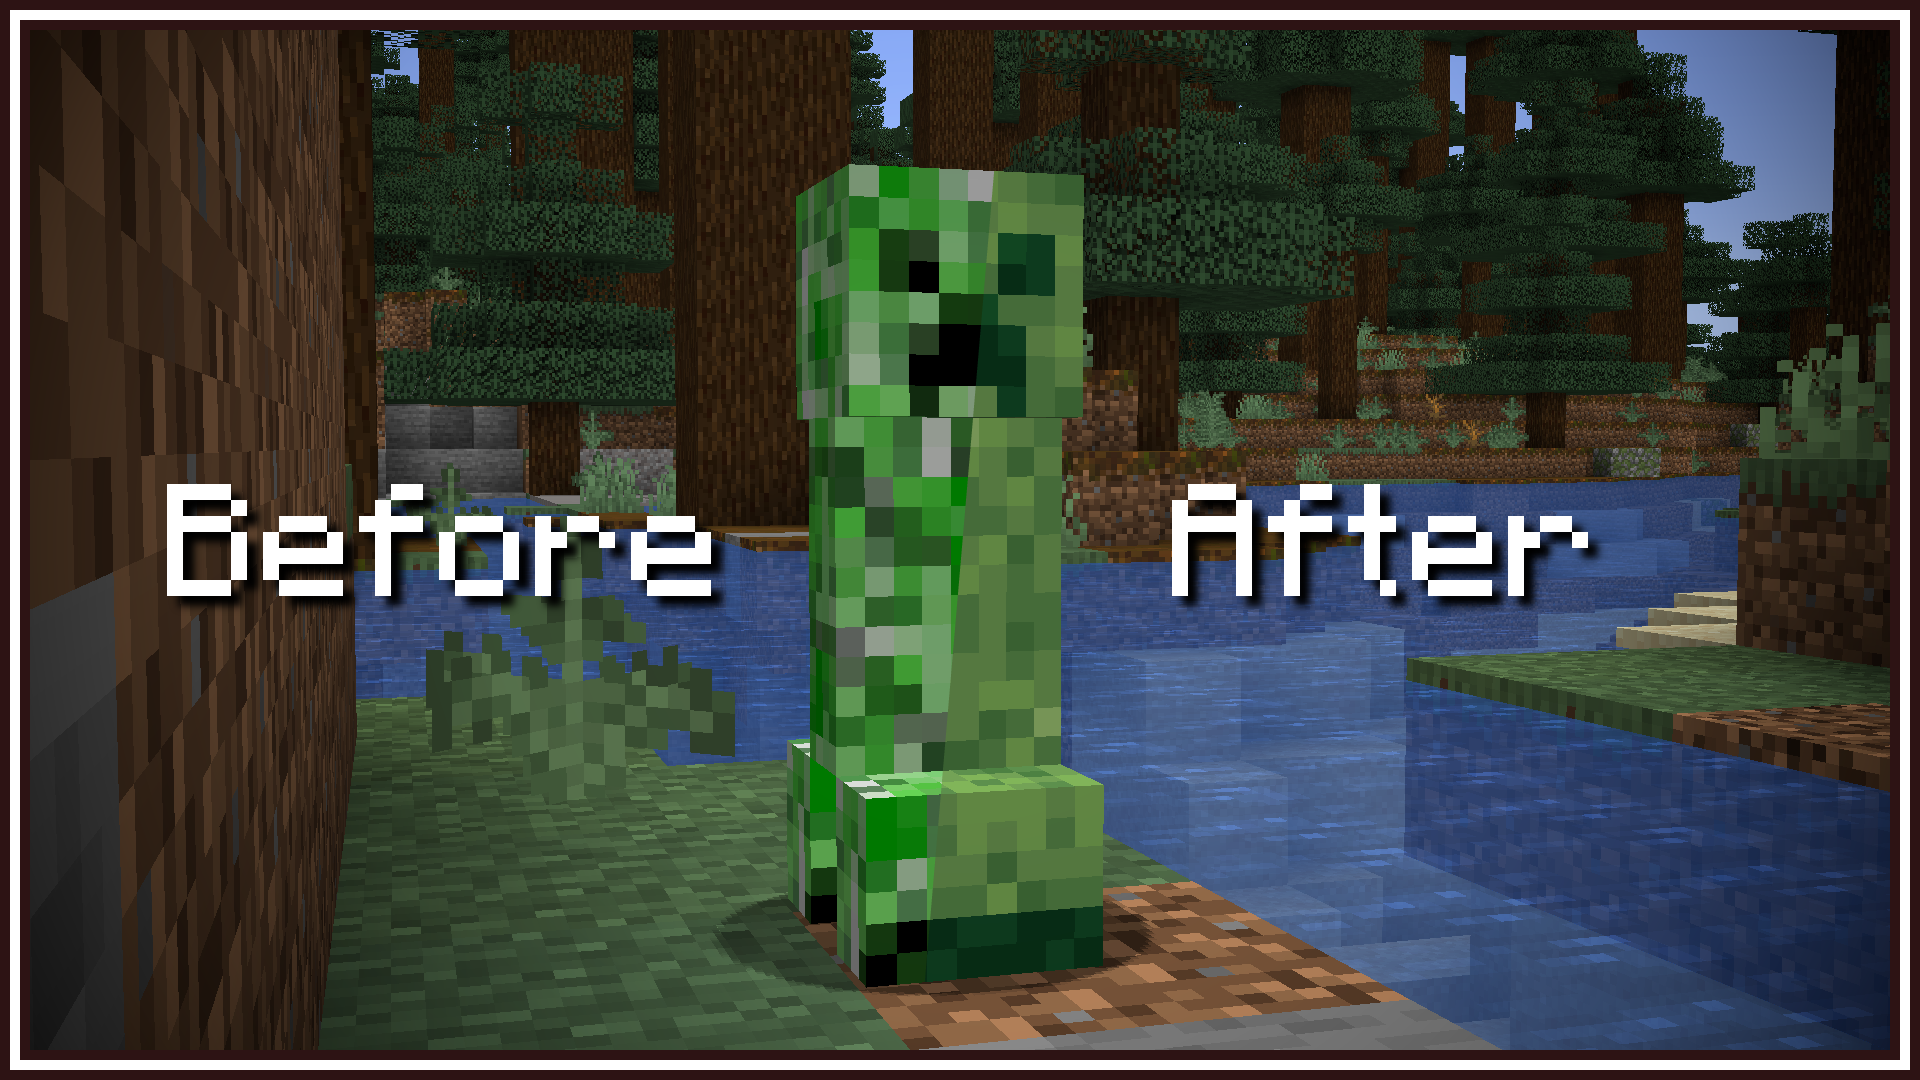 Quality Creeper for Minecraft 1.12.2